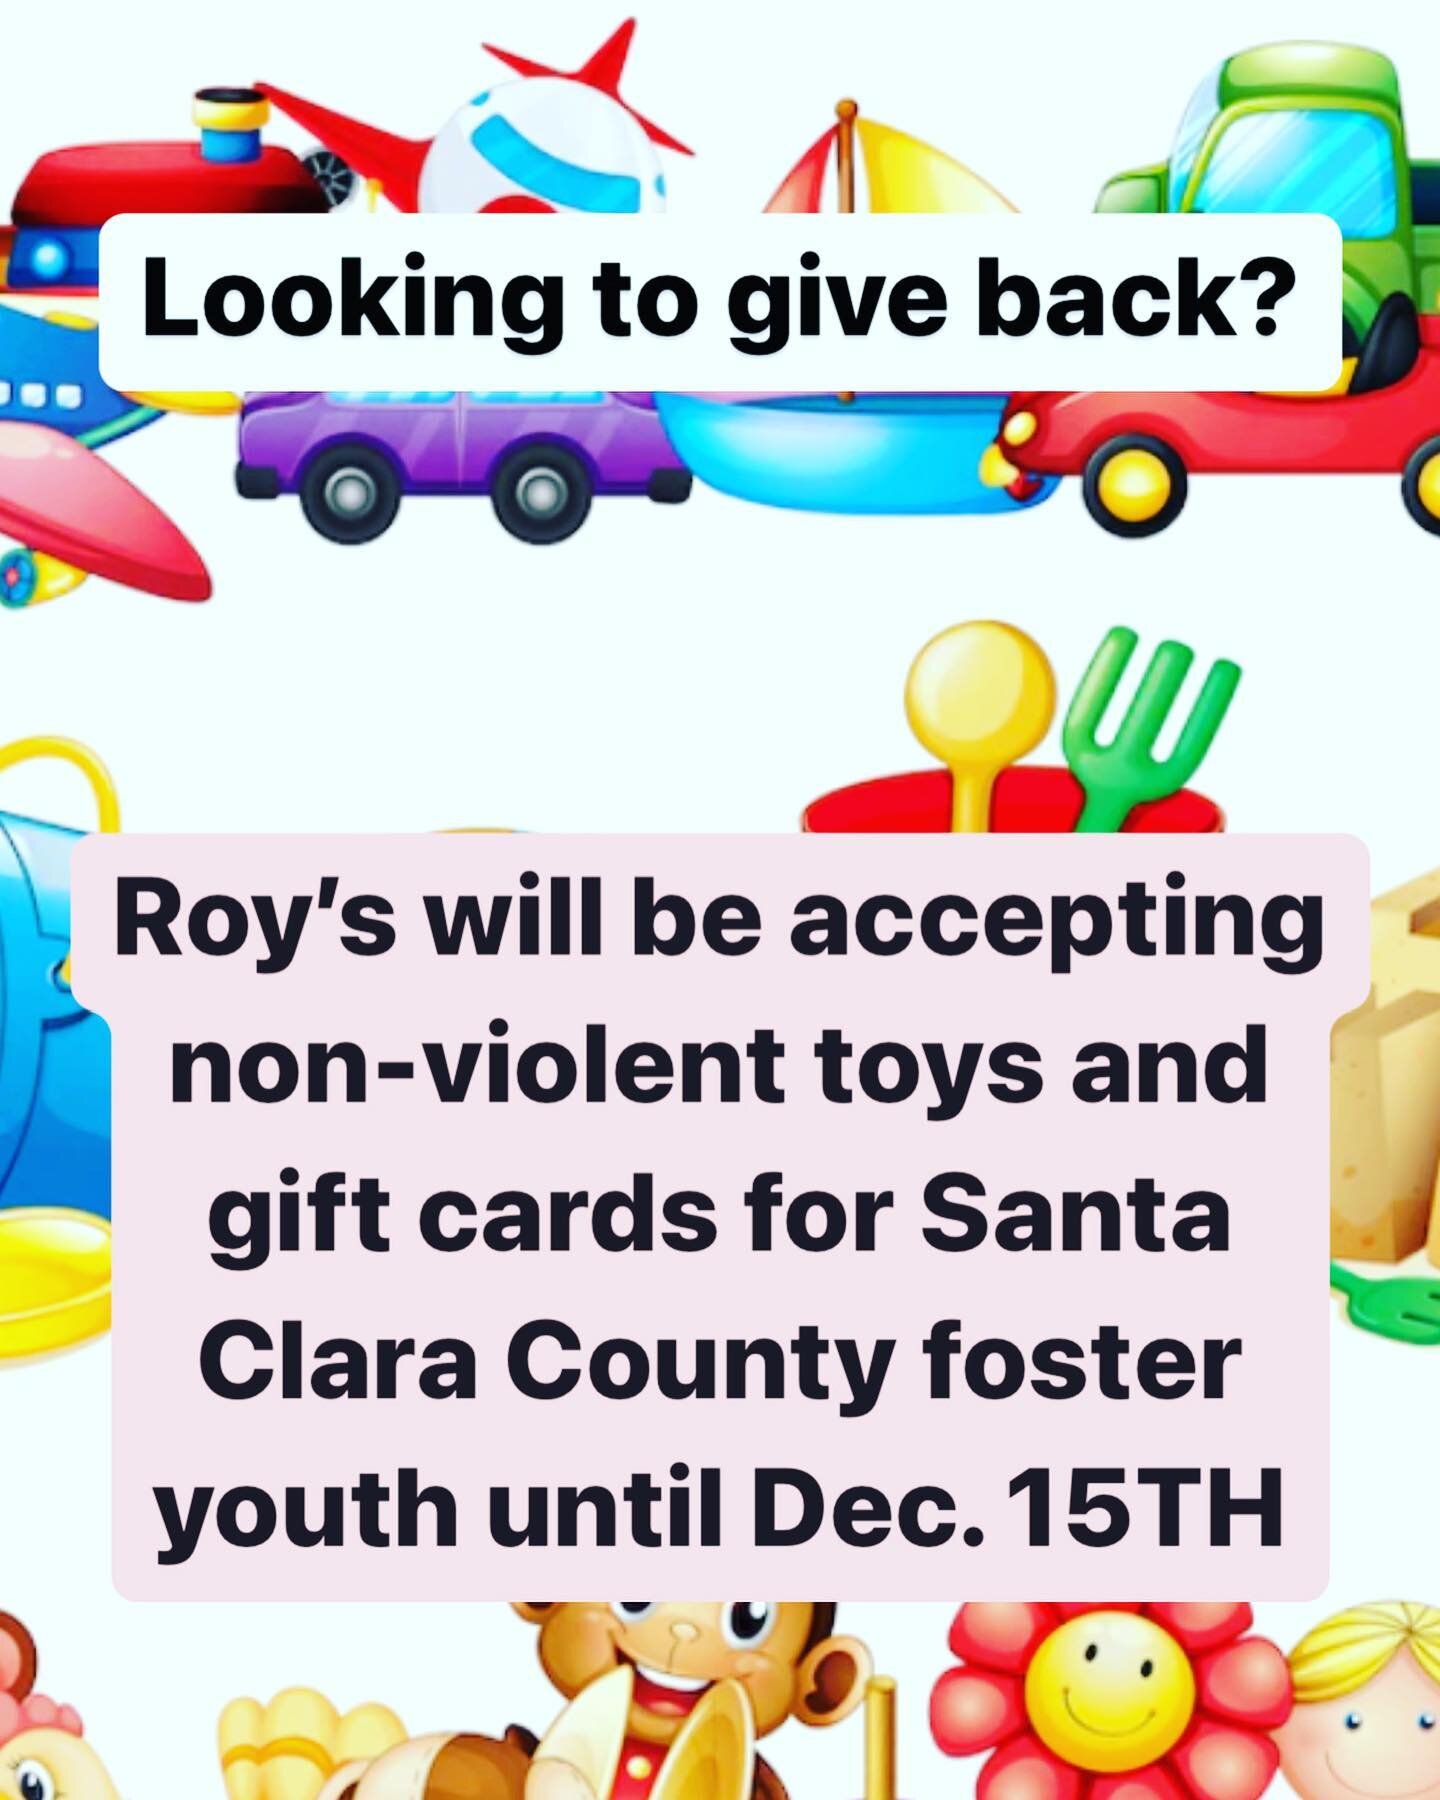 Roy&rsquo;s will be doing it&rsquo;s annual toy drive for Santa Clara County foster youth. Please participate by bringing a gift card or non-violent, unwrapped toy by December 15th!

#seasonofgiving #fosteryouth #toydrive #sanjose #dtsj #japantownsj 